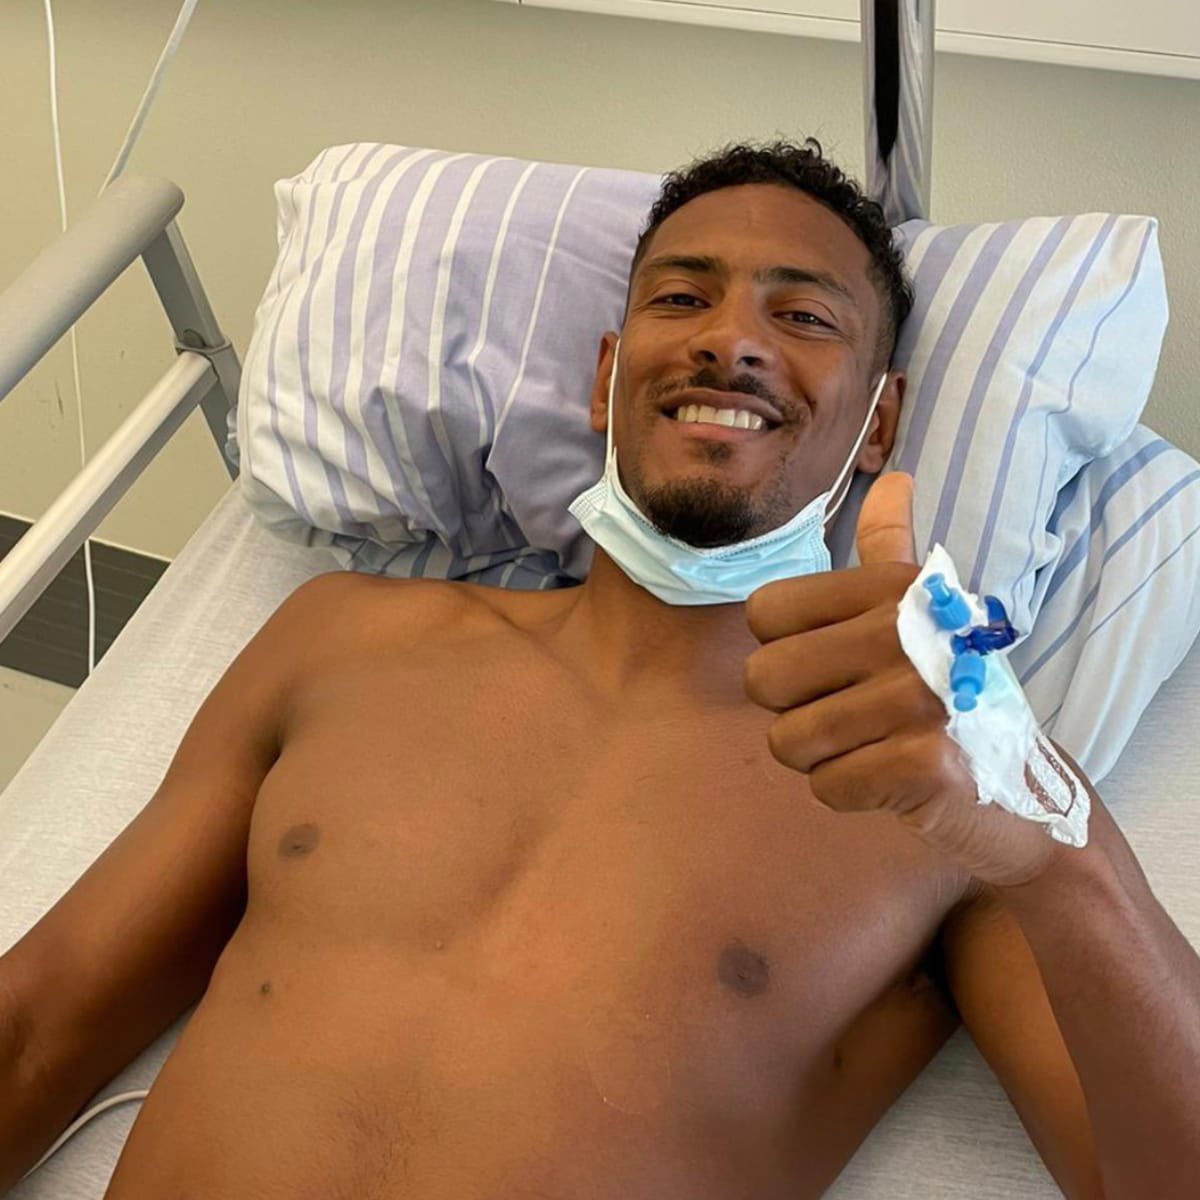 ❤️‍🩹 July 2022, Sébastien Haller was diagnosed with testicular cancer. ❤️ February 2023, Haller beats cancer and then he made a return to football. 🧡💚 February 2024, Haller scores the 𝐖𝐈𝐍𝐍𝐈𝐍𝐆 goal for Ivory Coast in the AFCON final. Never give up. 👏🏻